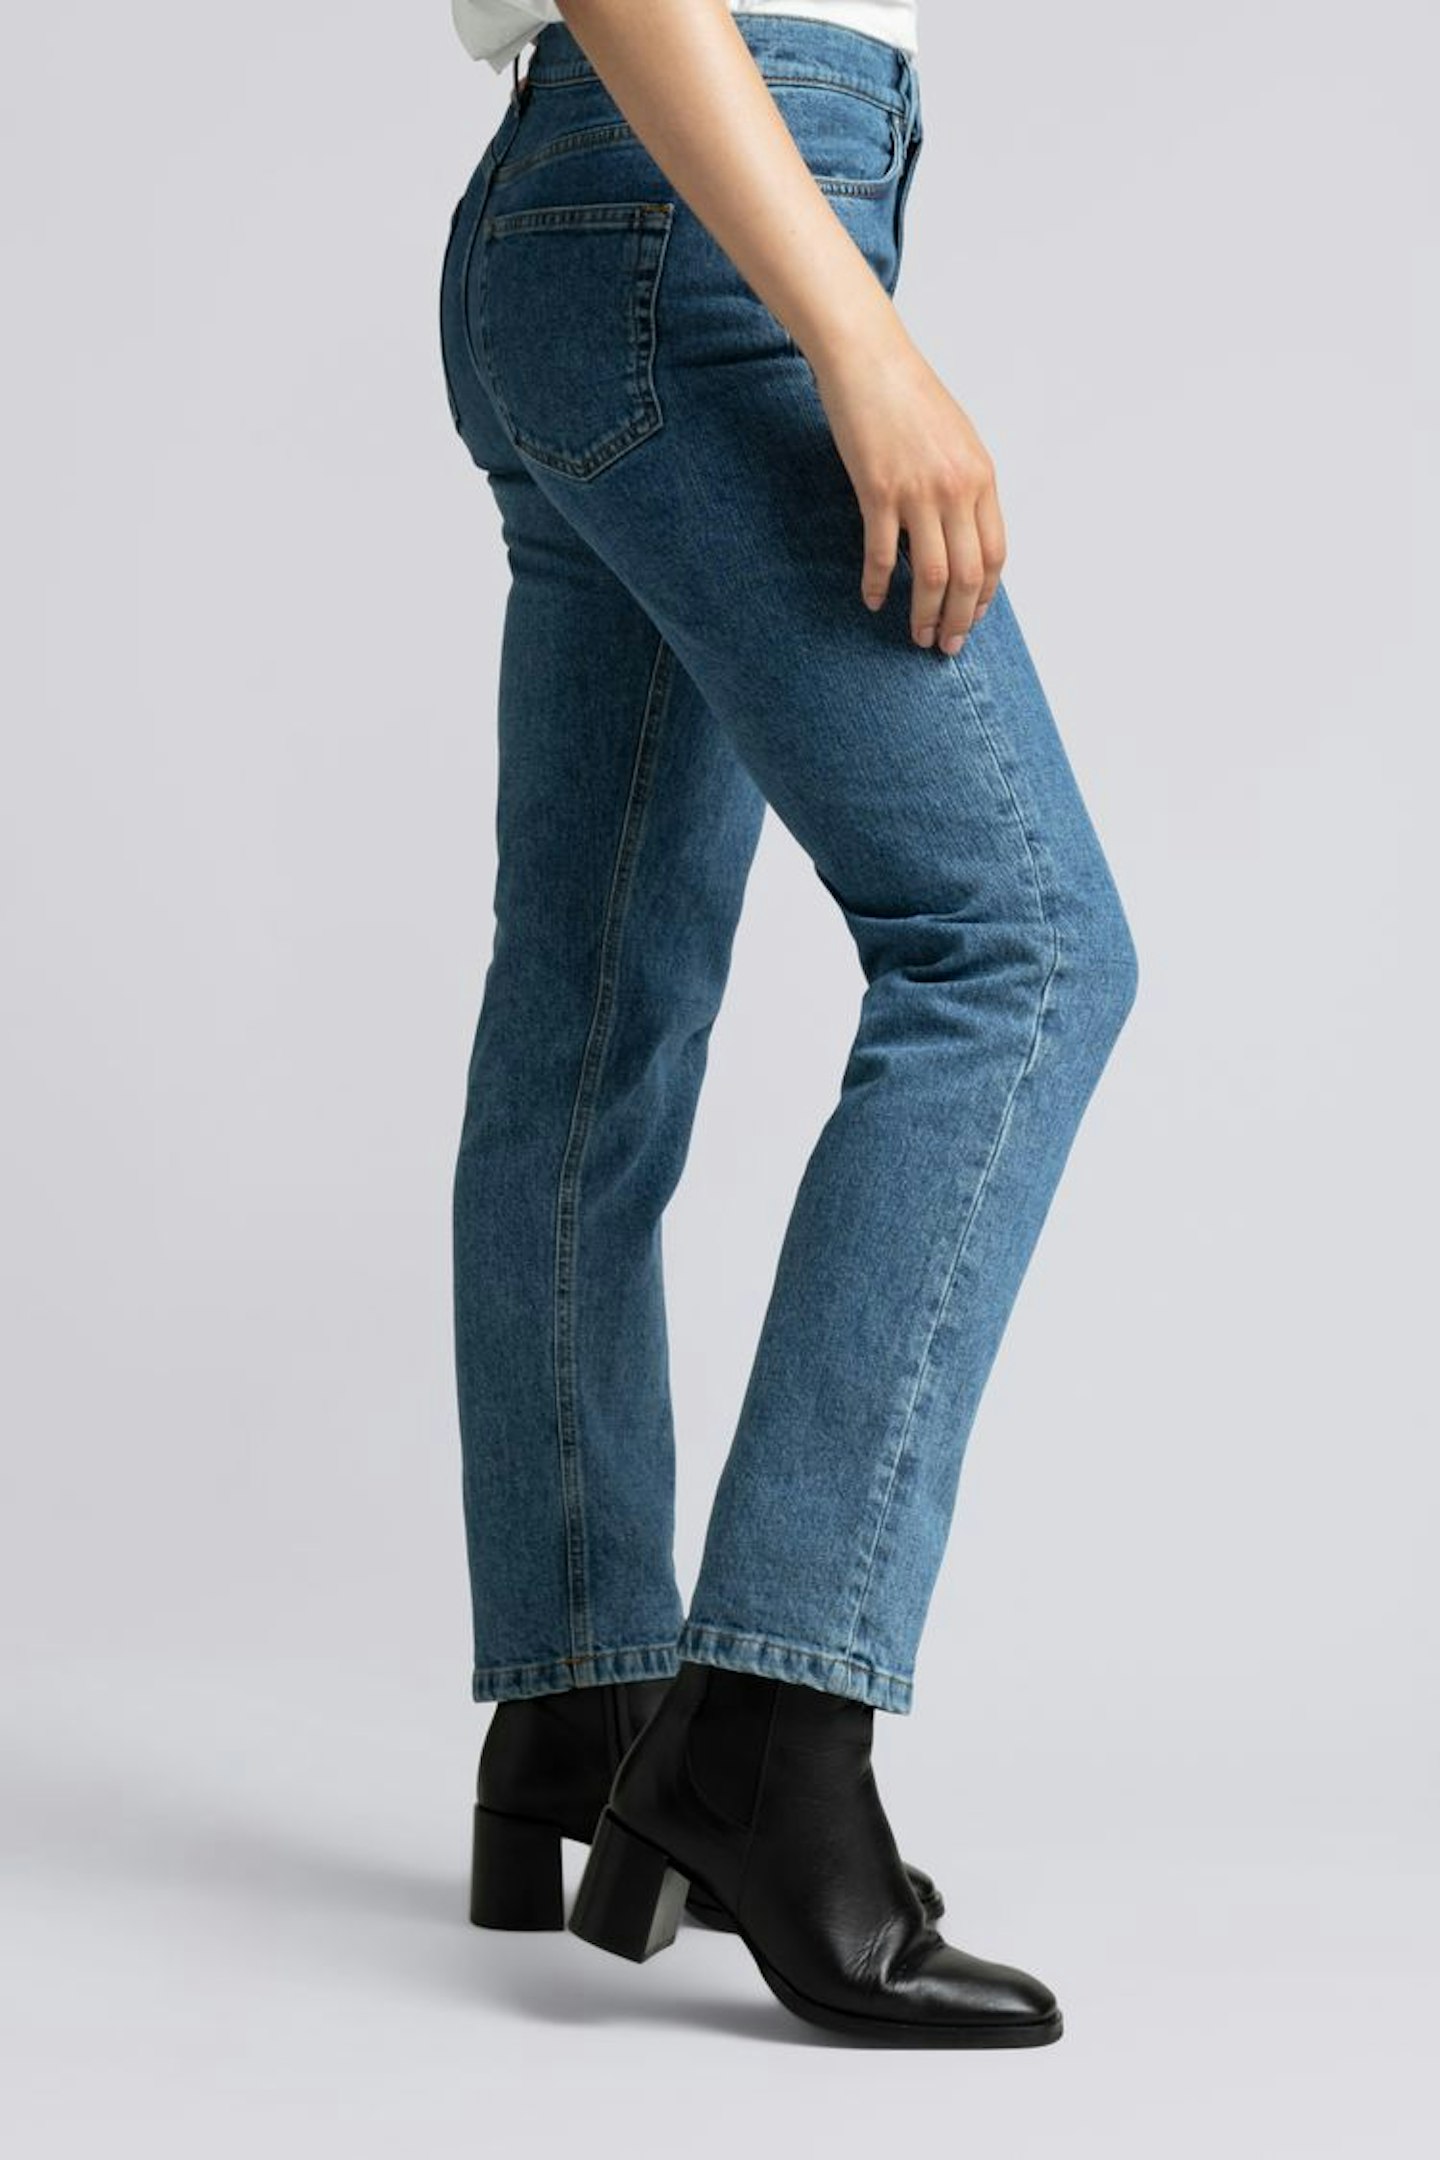 Asket, The Standard Jeans, £115